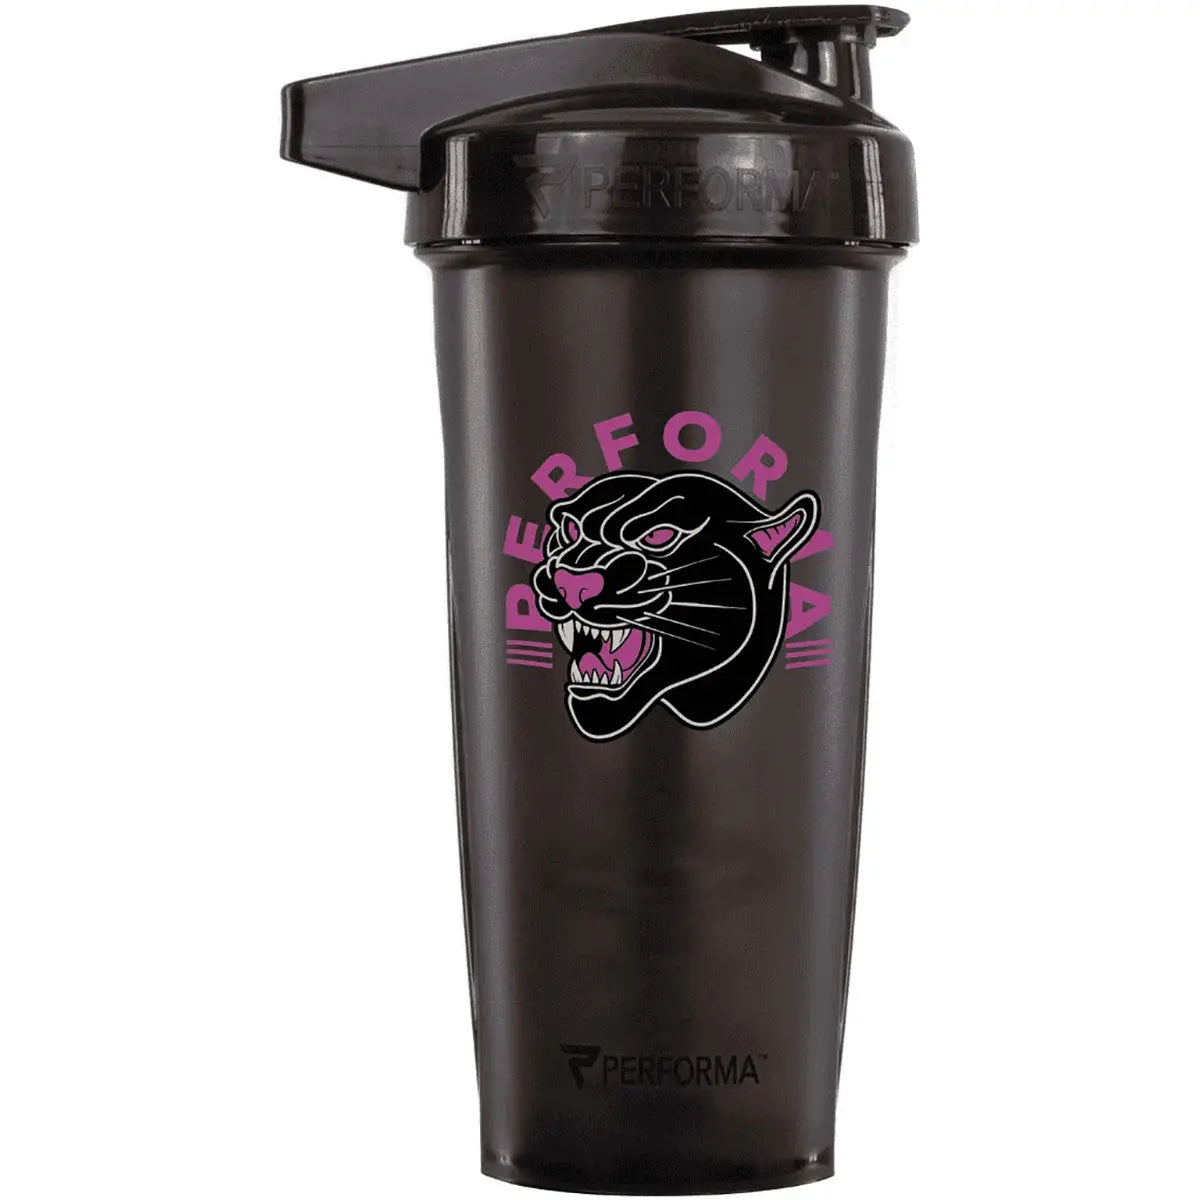 Performa Activ 28 oz. Shaker Cup Gym Bottle - Performa Panther Performa